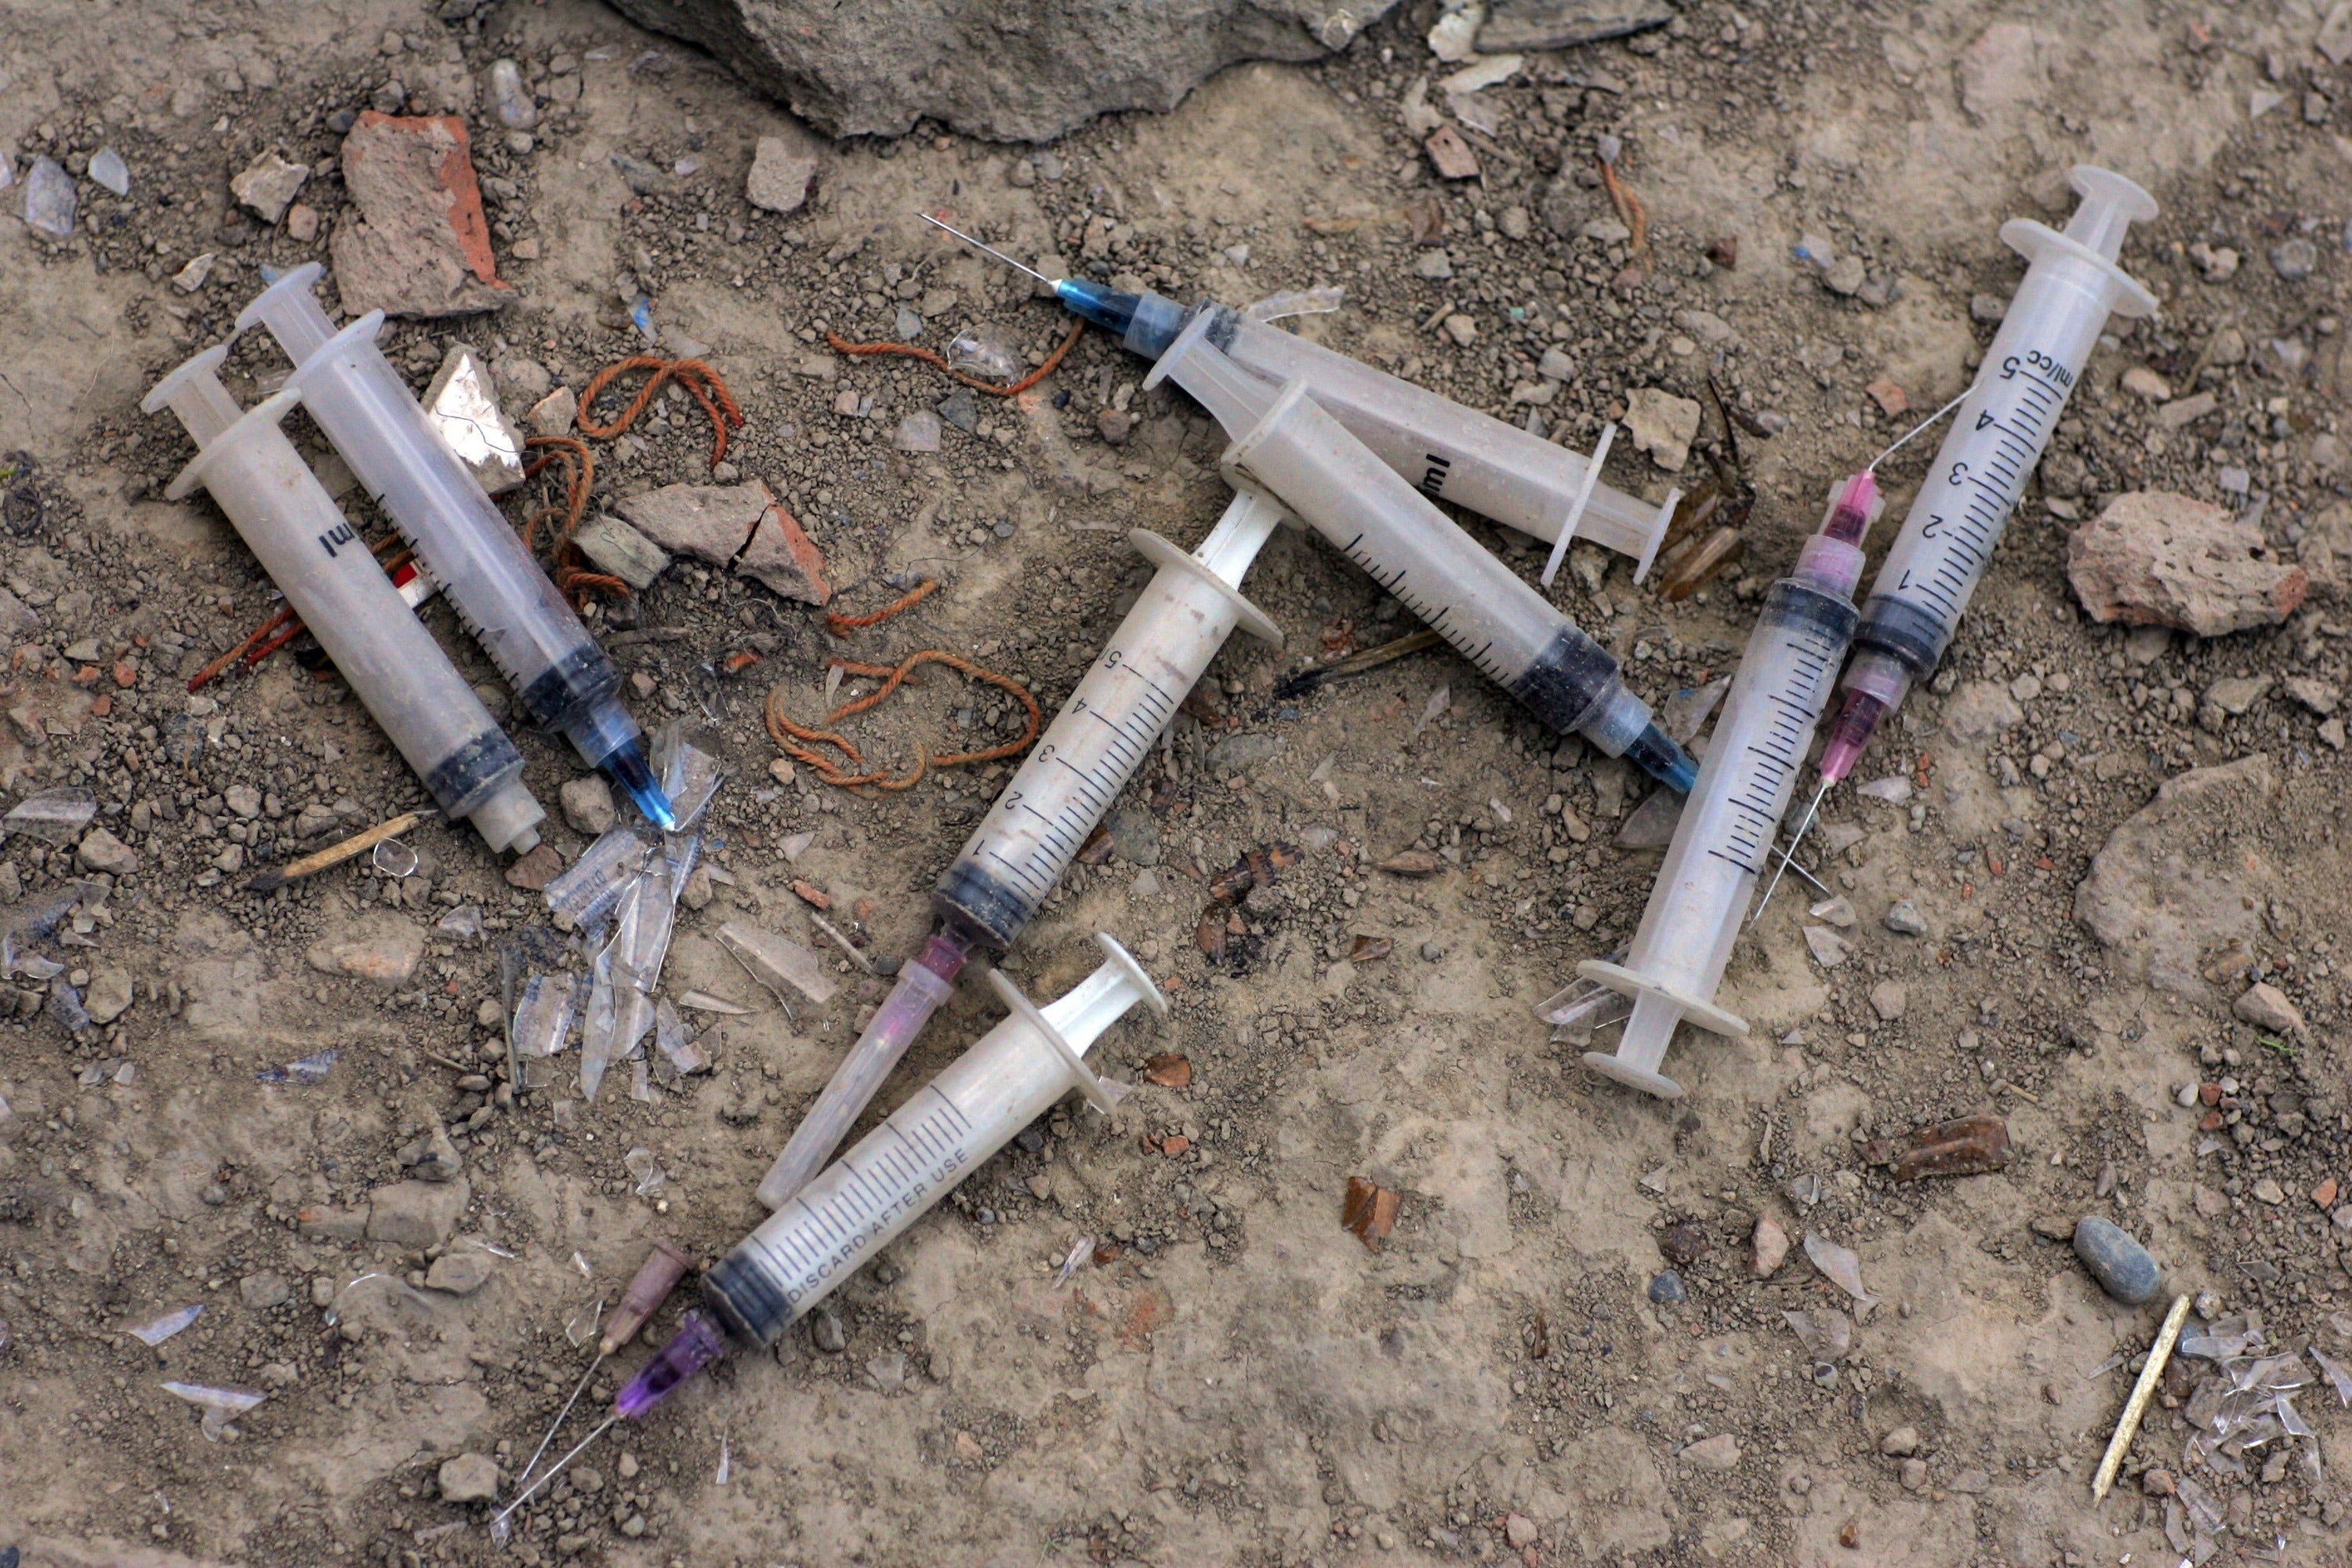 Used heroin needles discarded on the ground